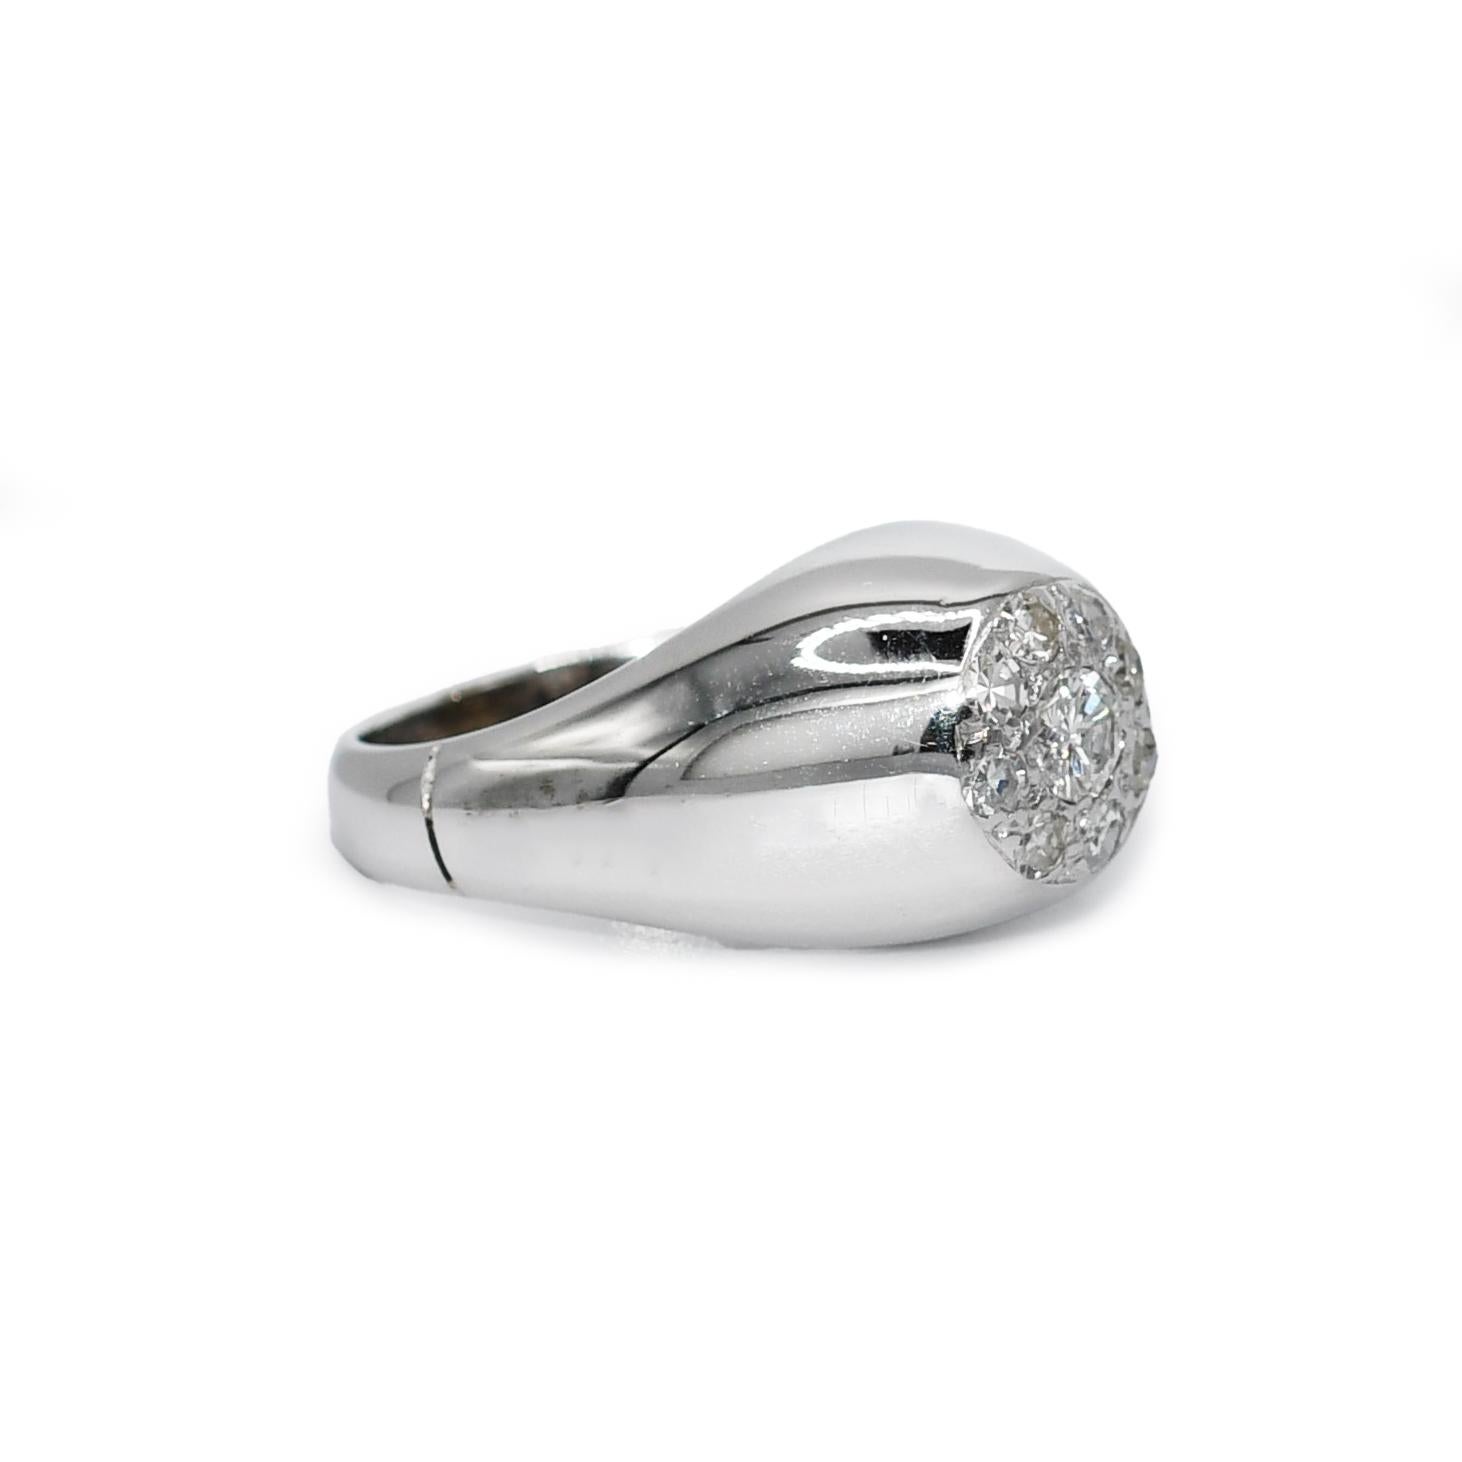 Ladies 14k white gold and diamond cocktail ring.
Tests 14k using an electronic tester. The gross weight is 9.5 grams.
The center diamond is a round brilliant cut approximately .20 to .22 carats, G to H color, Si clarity.
There are round, single-cut